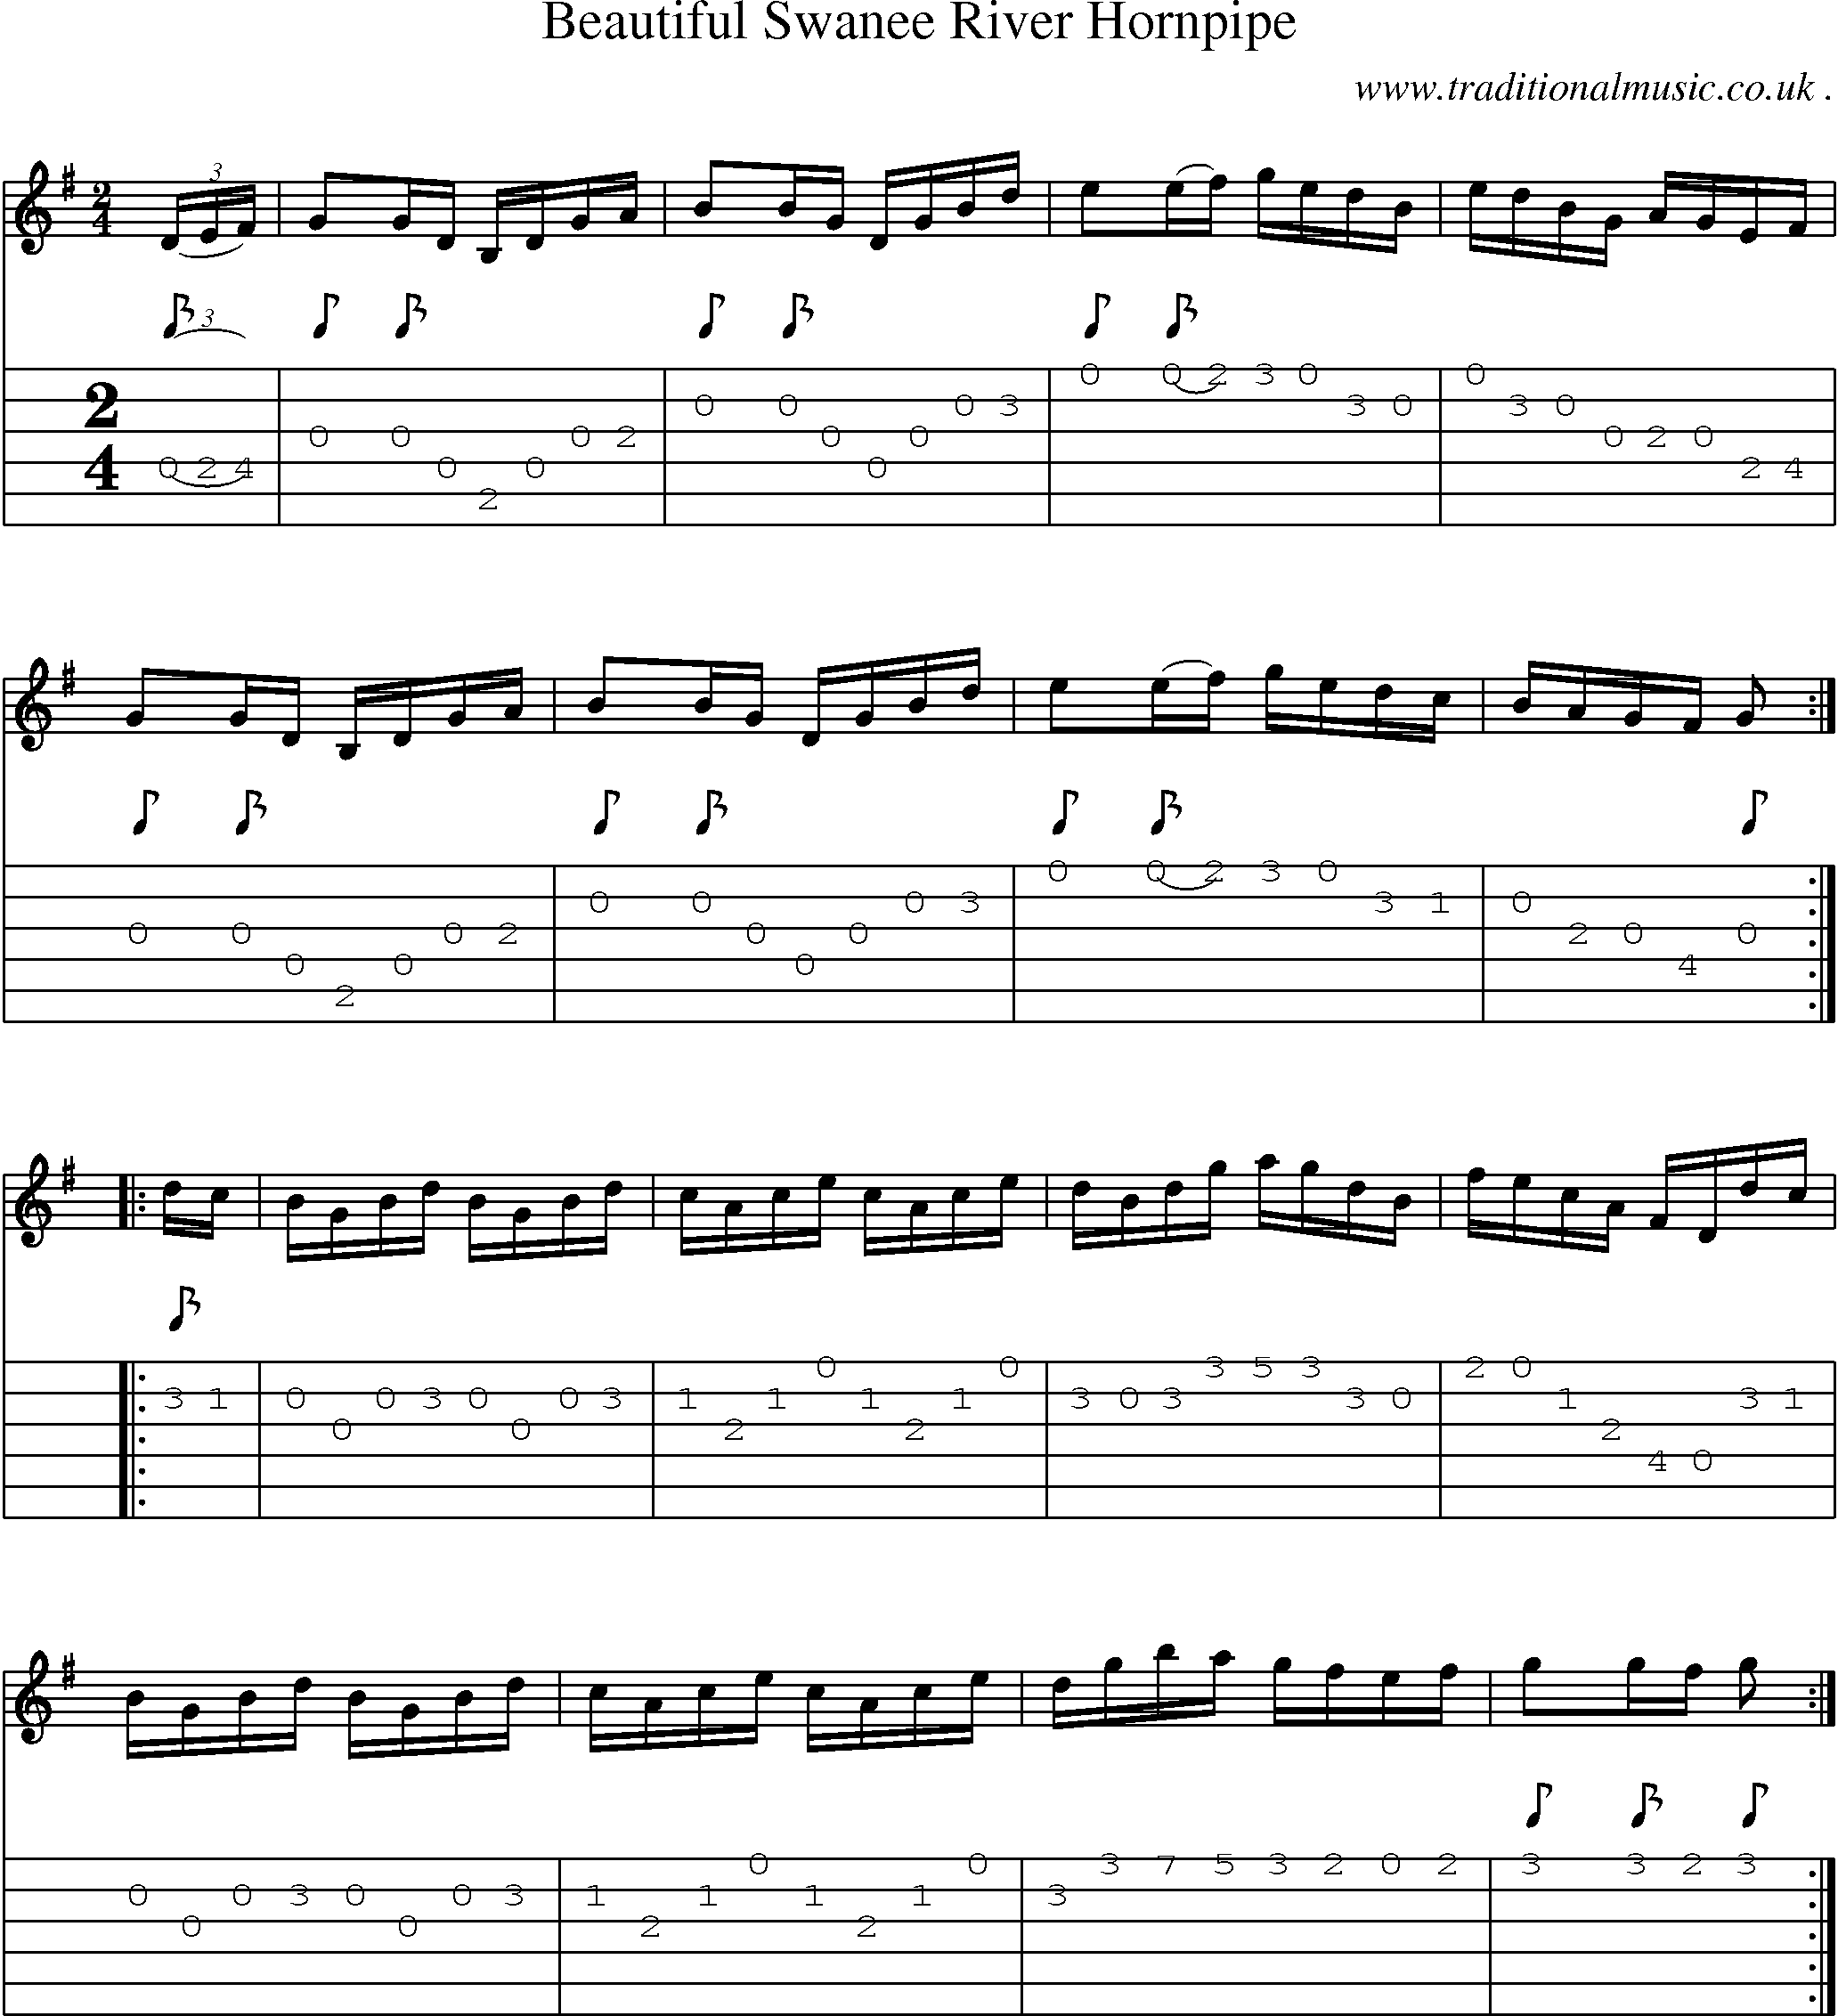 Sheet-Music and Guitar Tabs for Beautiful Swanee River Hornpipe